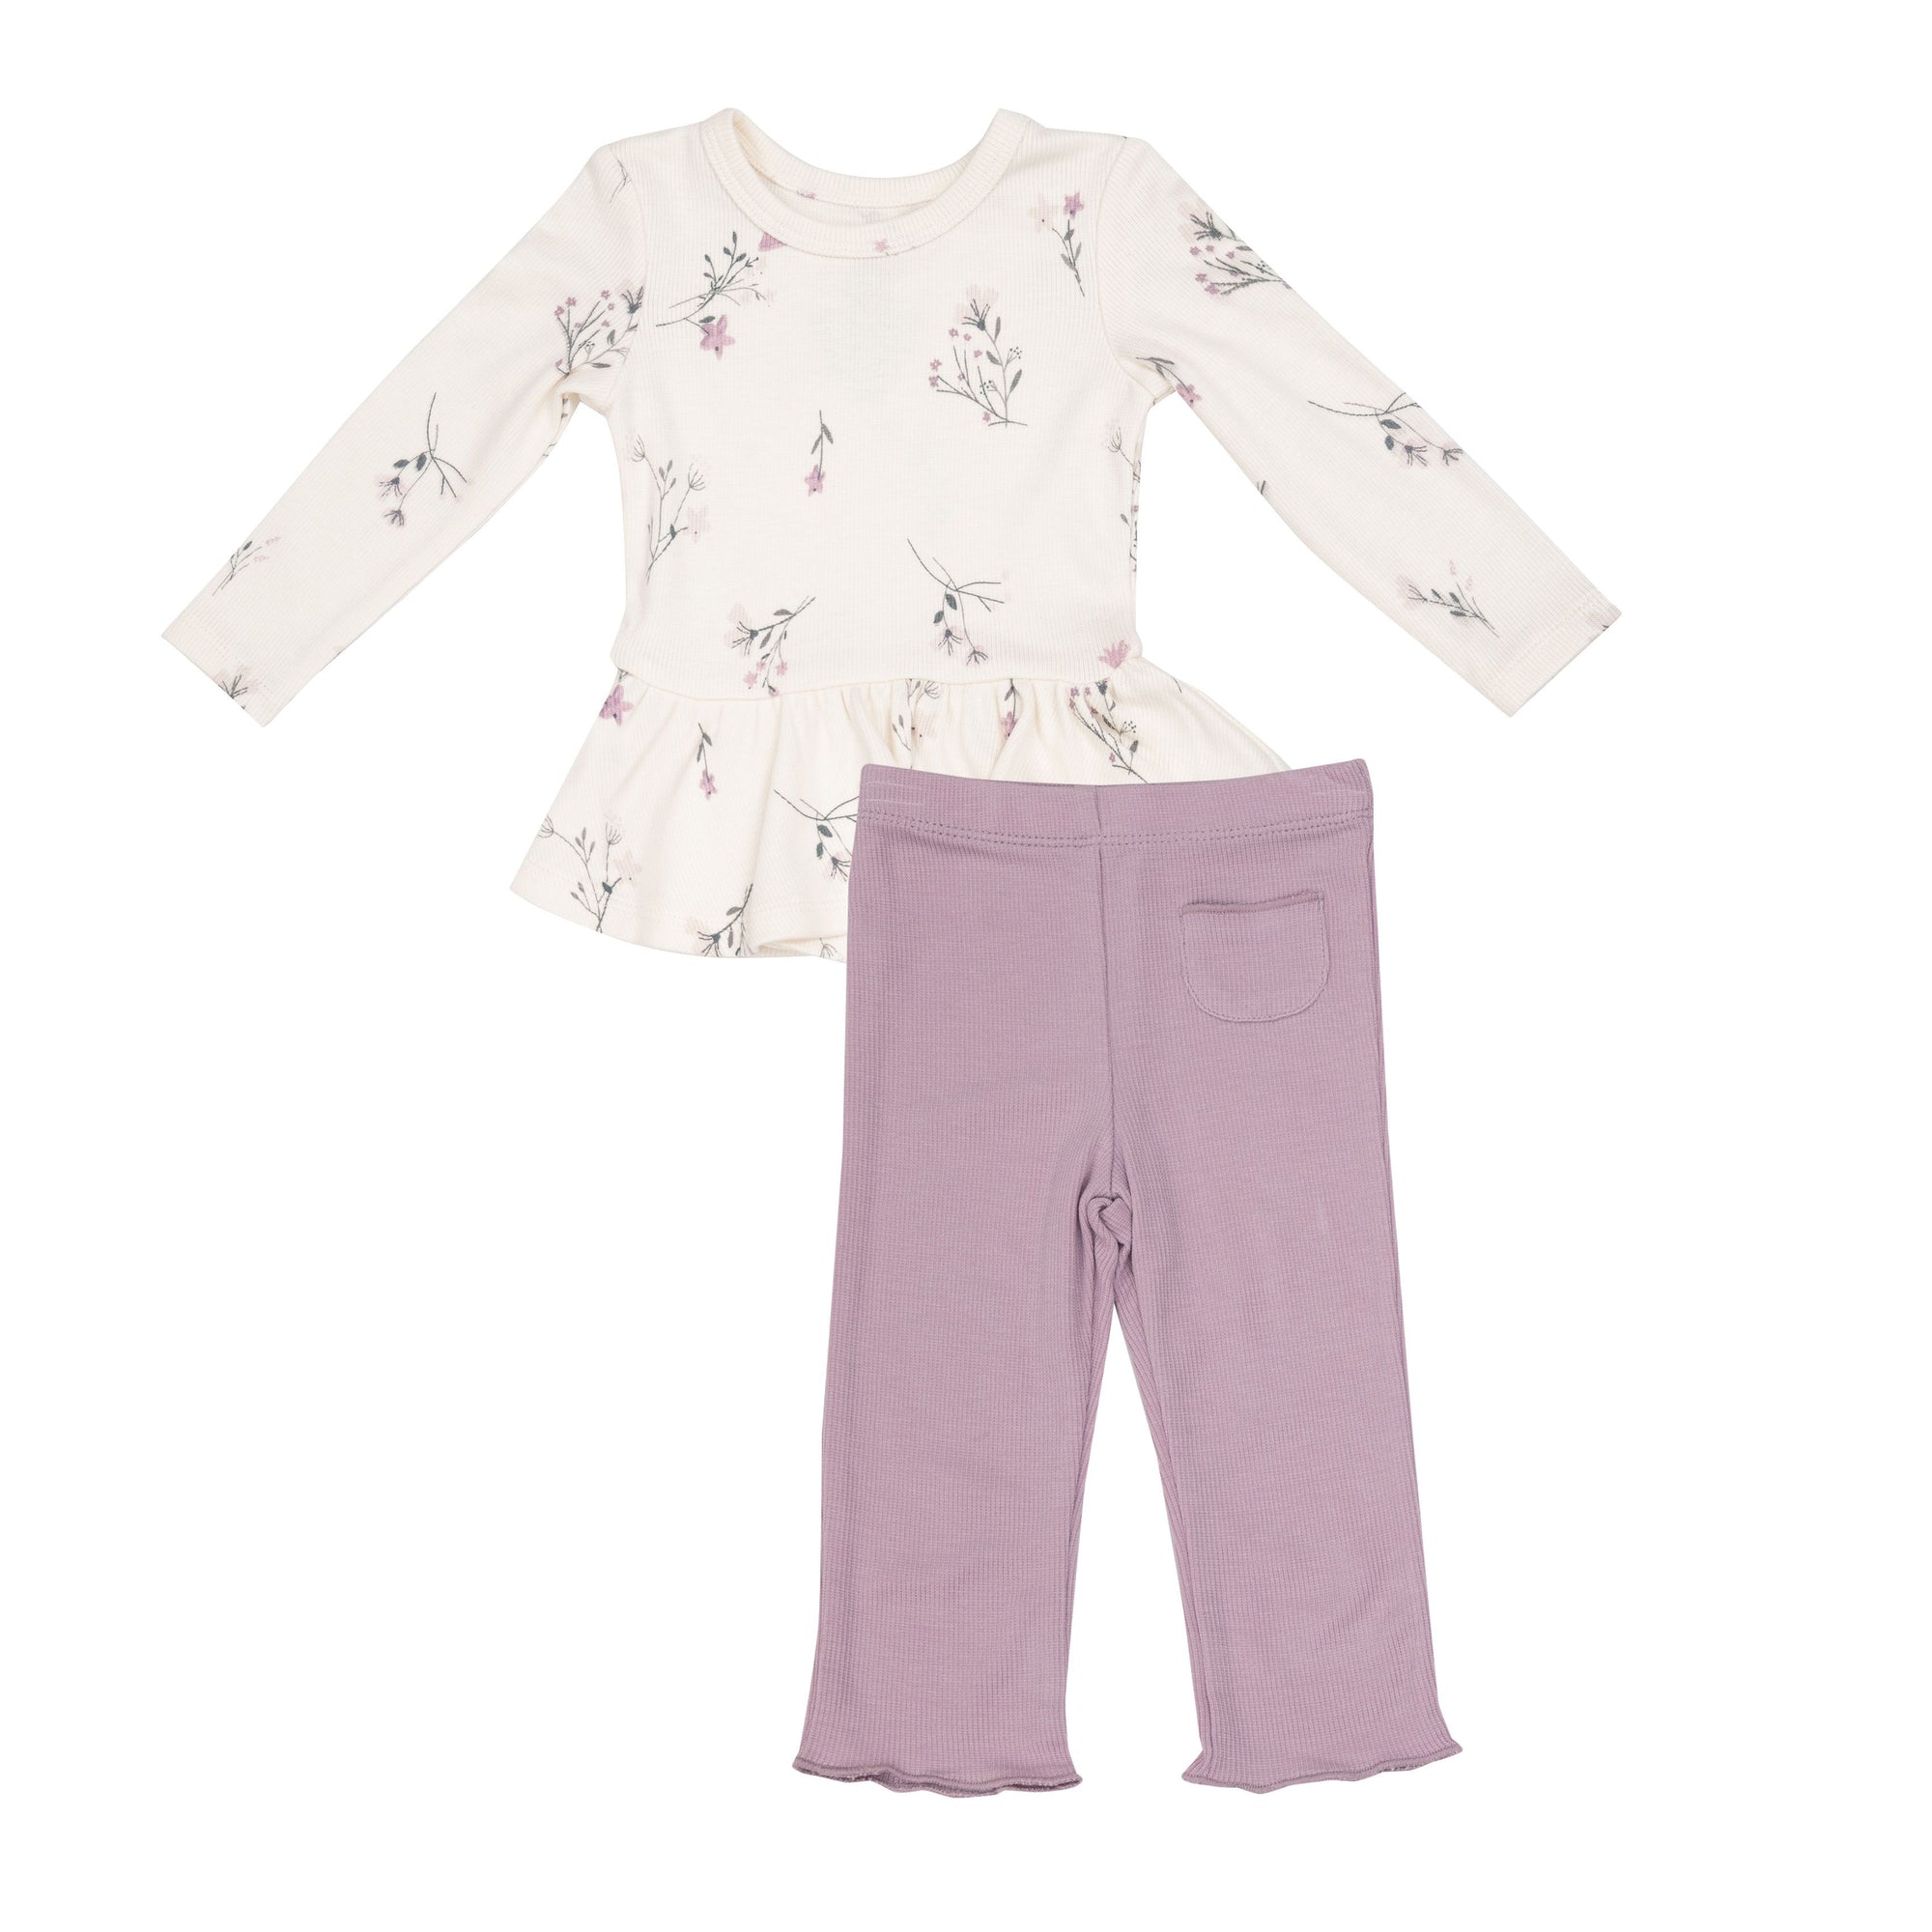 Wispy Floral Peplum Top and Flare Pant Set